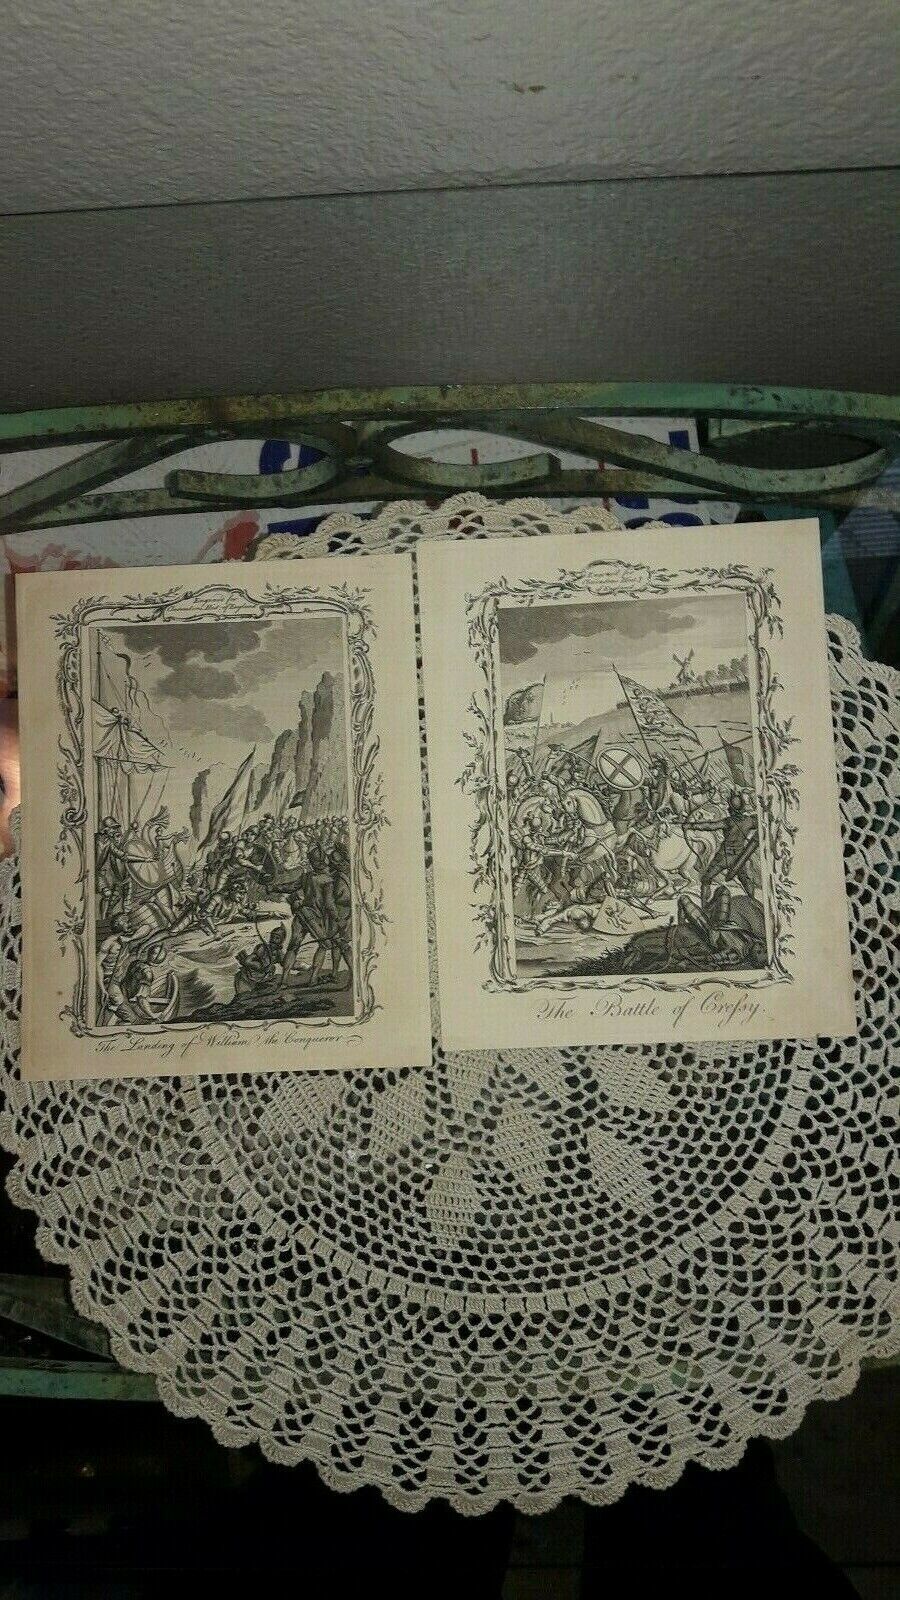 LOT OF 2 ANTIQUE PLATE PRINTS, CLARENDON'S HISTORY OF ENGLAND, BATTLE CRESPY +